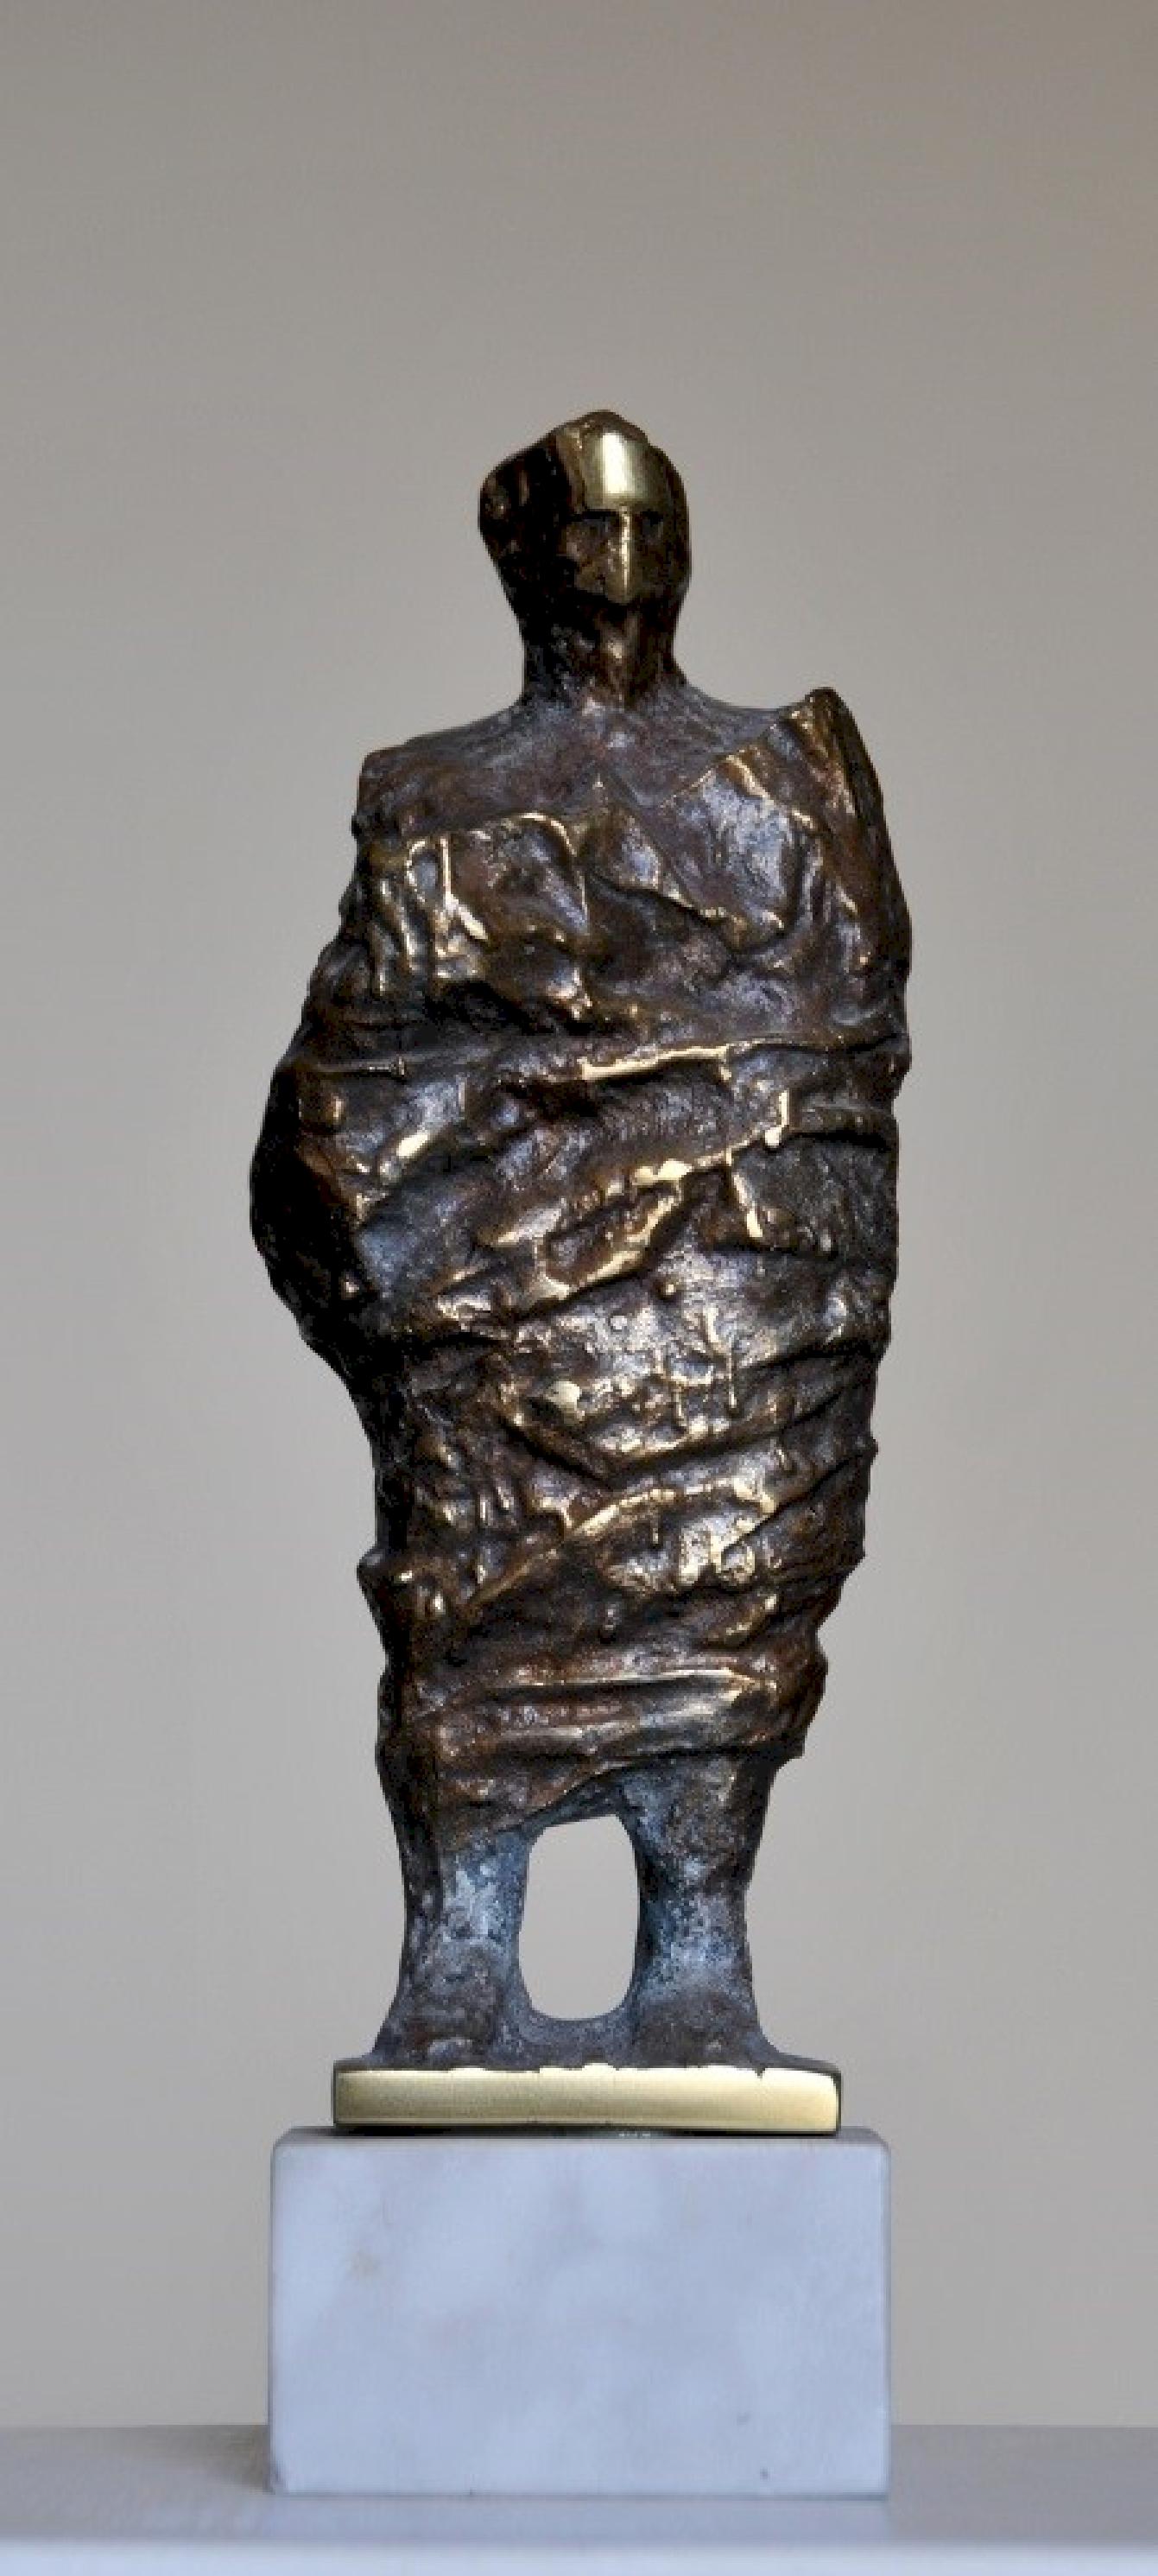 "Robed II" Bronze Sculpture 10" x 4" x 2" inch by Sarkis Tossonian

Sarkis Tossoonian was born in Alexandria in 1953. He graduated from the Faculty of Fine Arts/Sculpture in 1979. He started exhibiting in individual and group exhibitions in